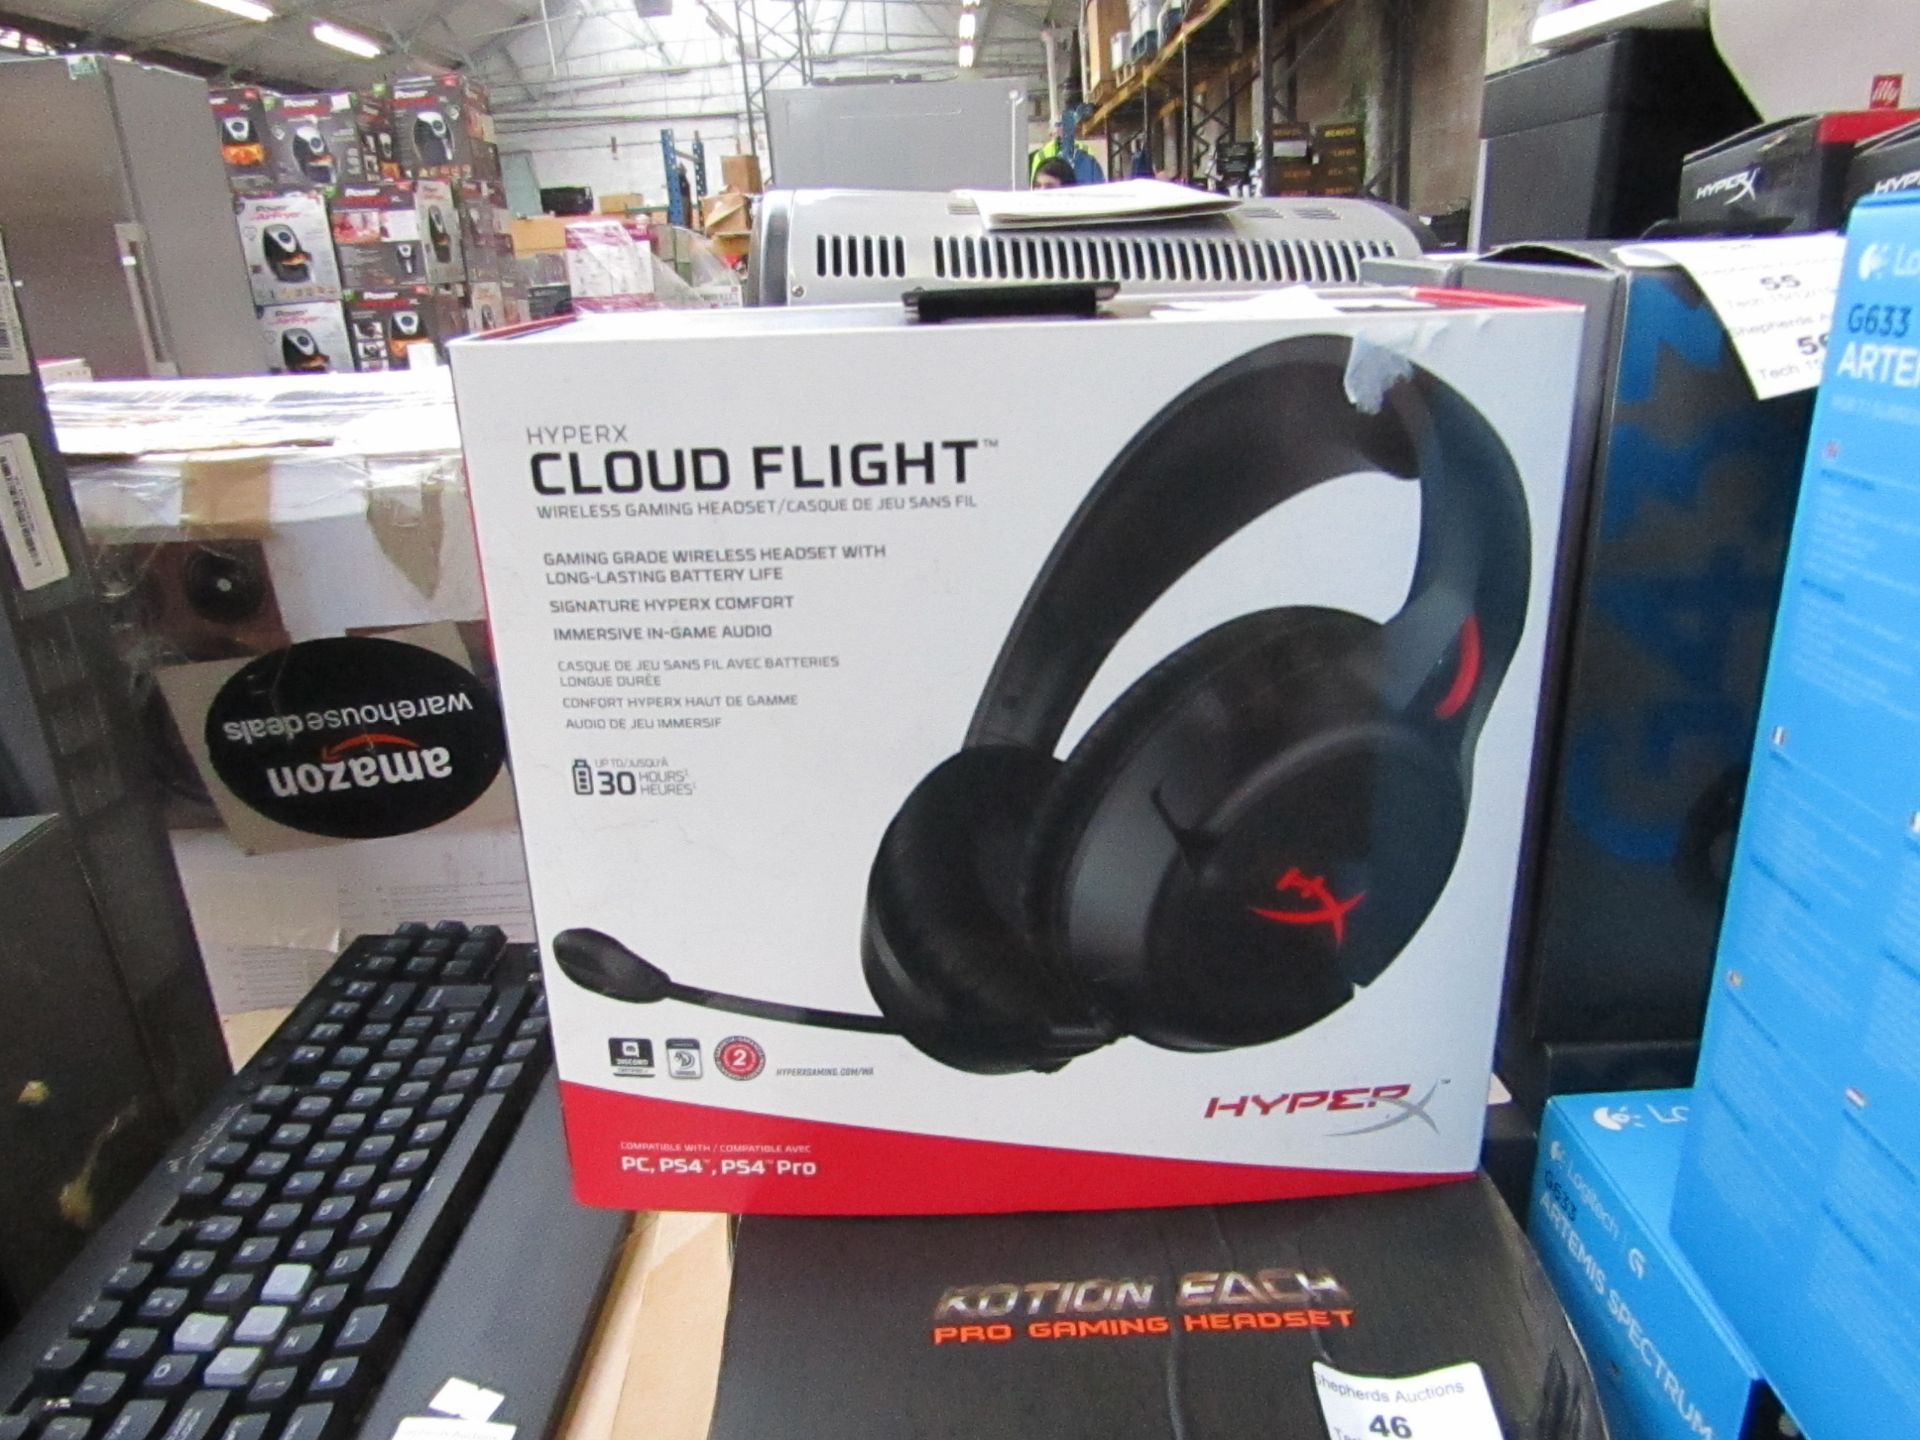 Hyper X cloud flight wireless gaming headset, untested and boxed.